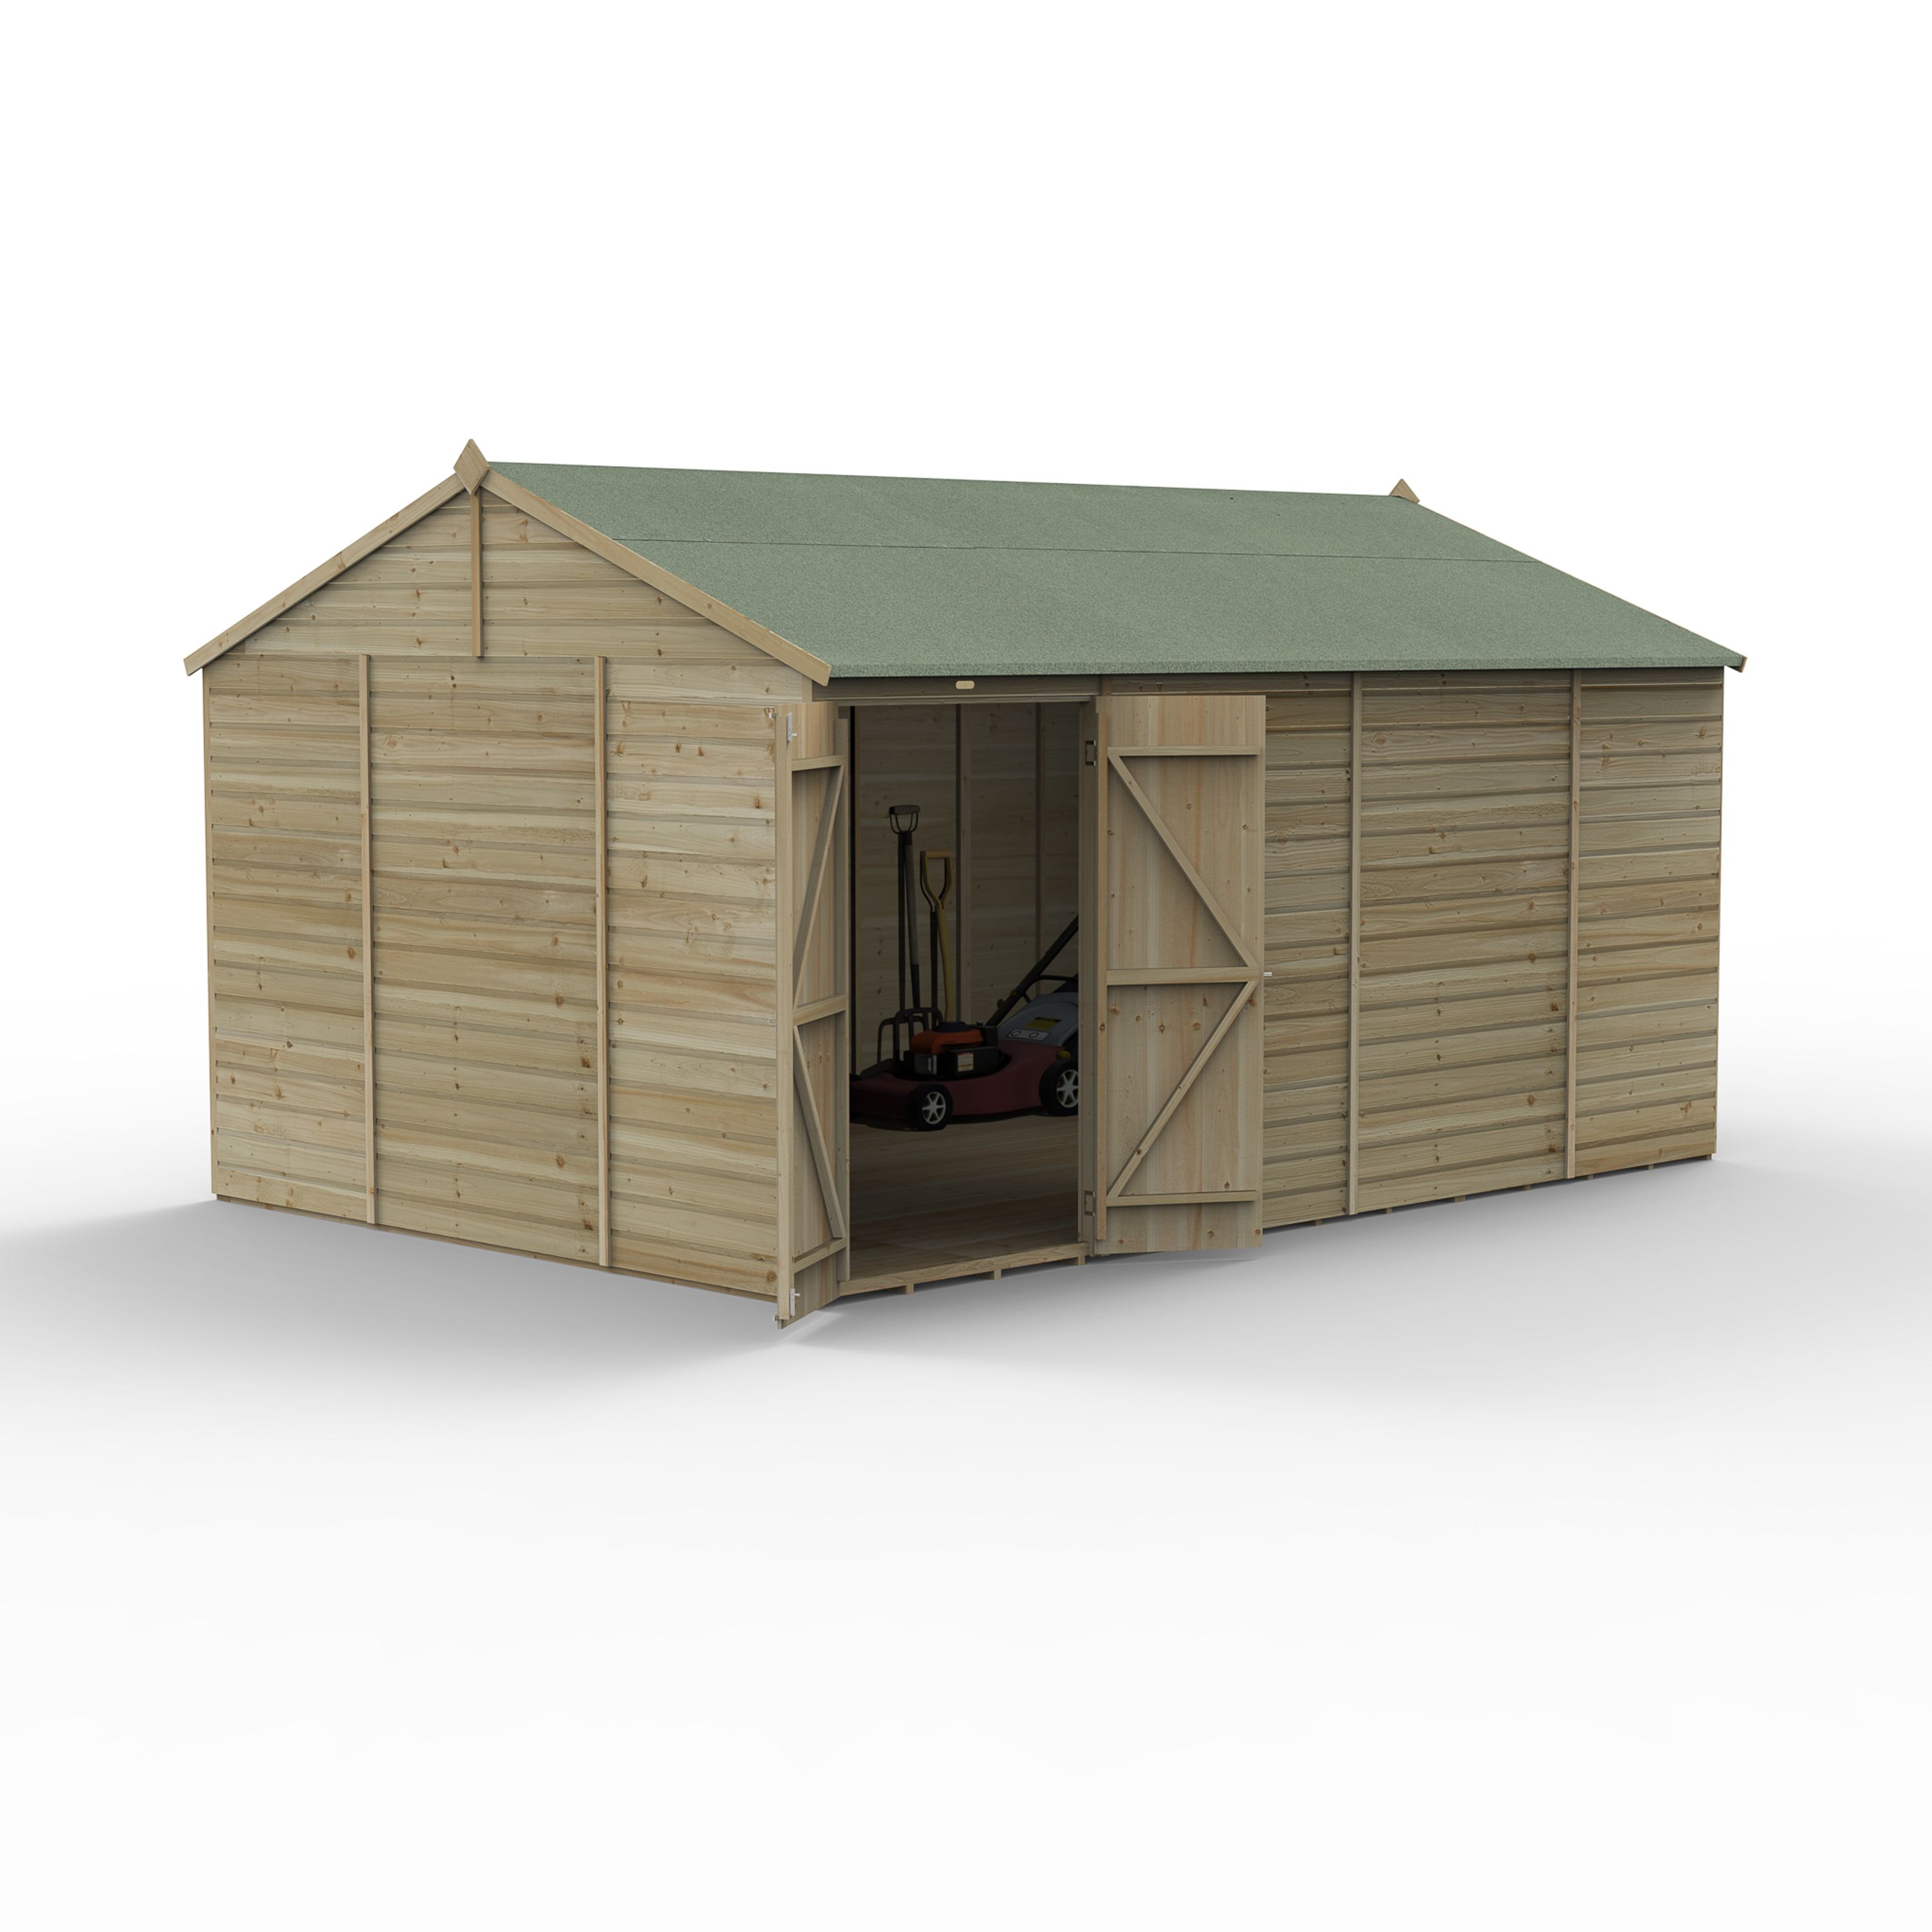 Forest Garden Beckwood 10x15 ft Reverse apex Natural timber Wooden 2 door Shed with floor (Base included) - Assembly not required